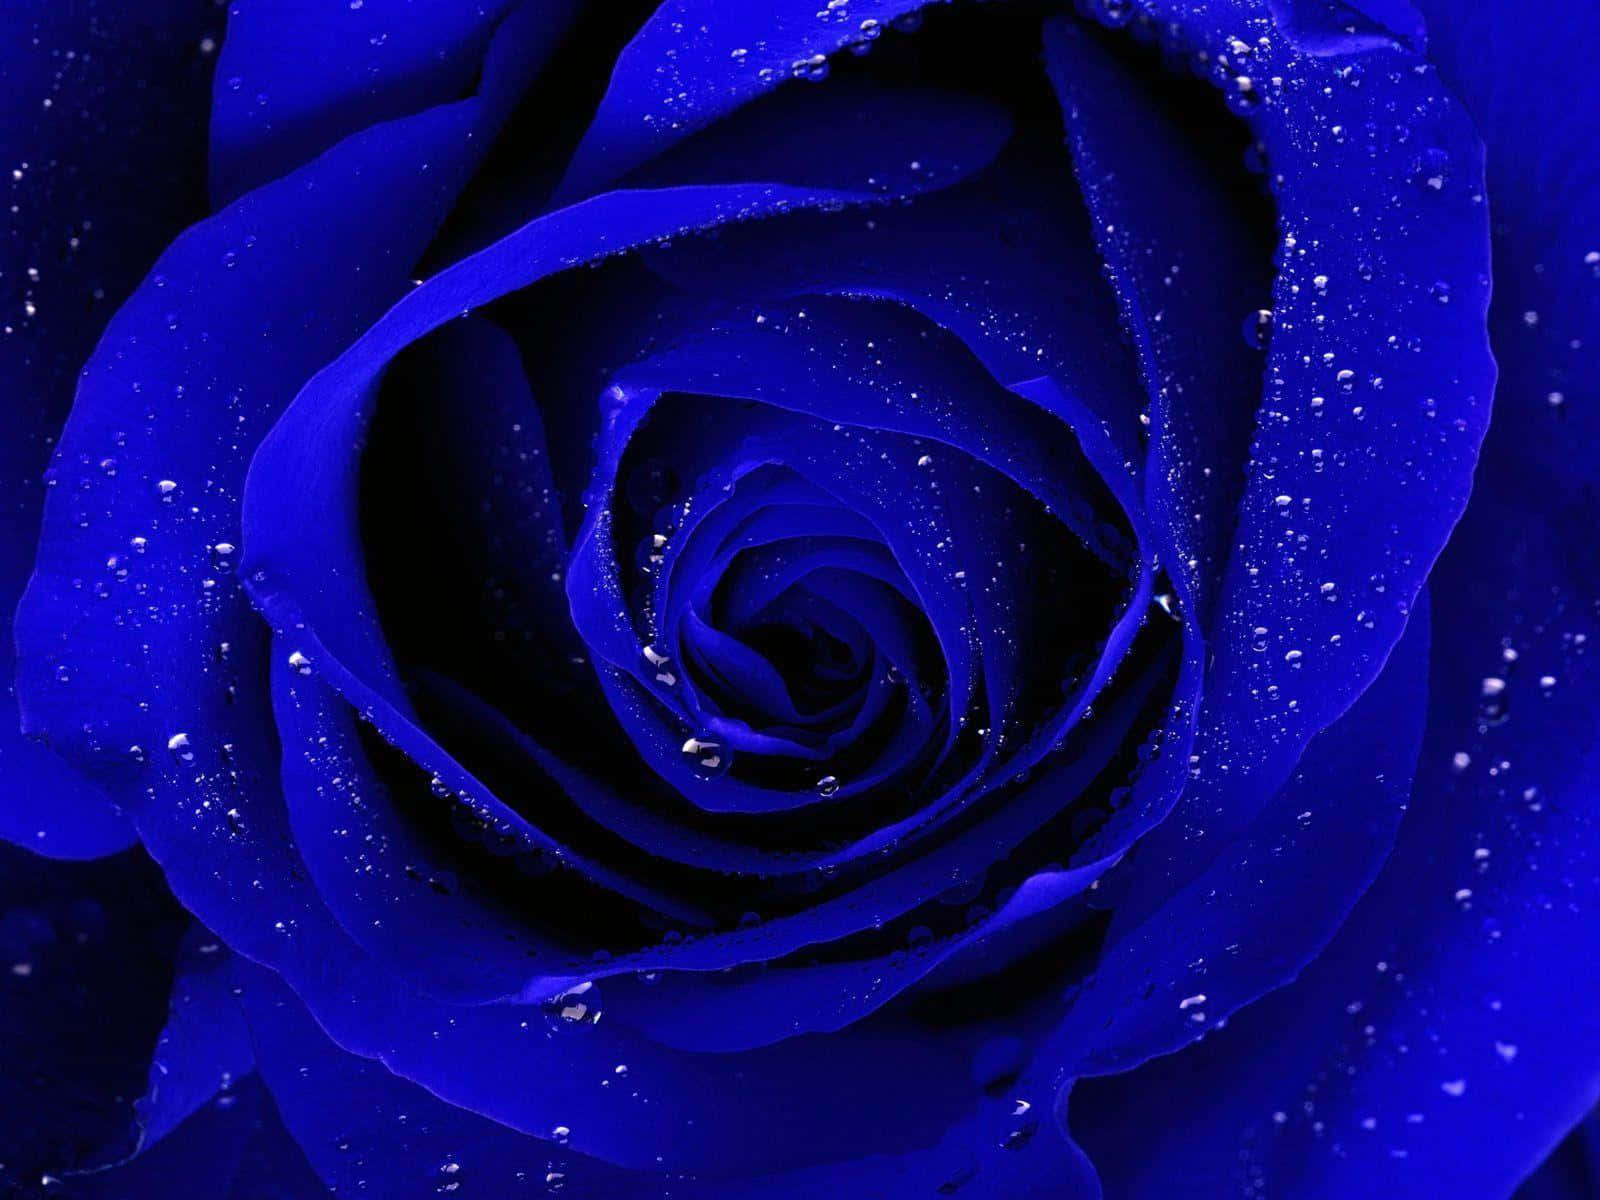 A Blue Rose With Water Drops On It Wallpaper